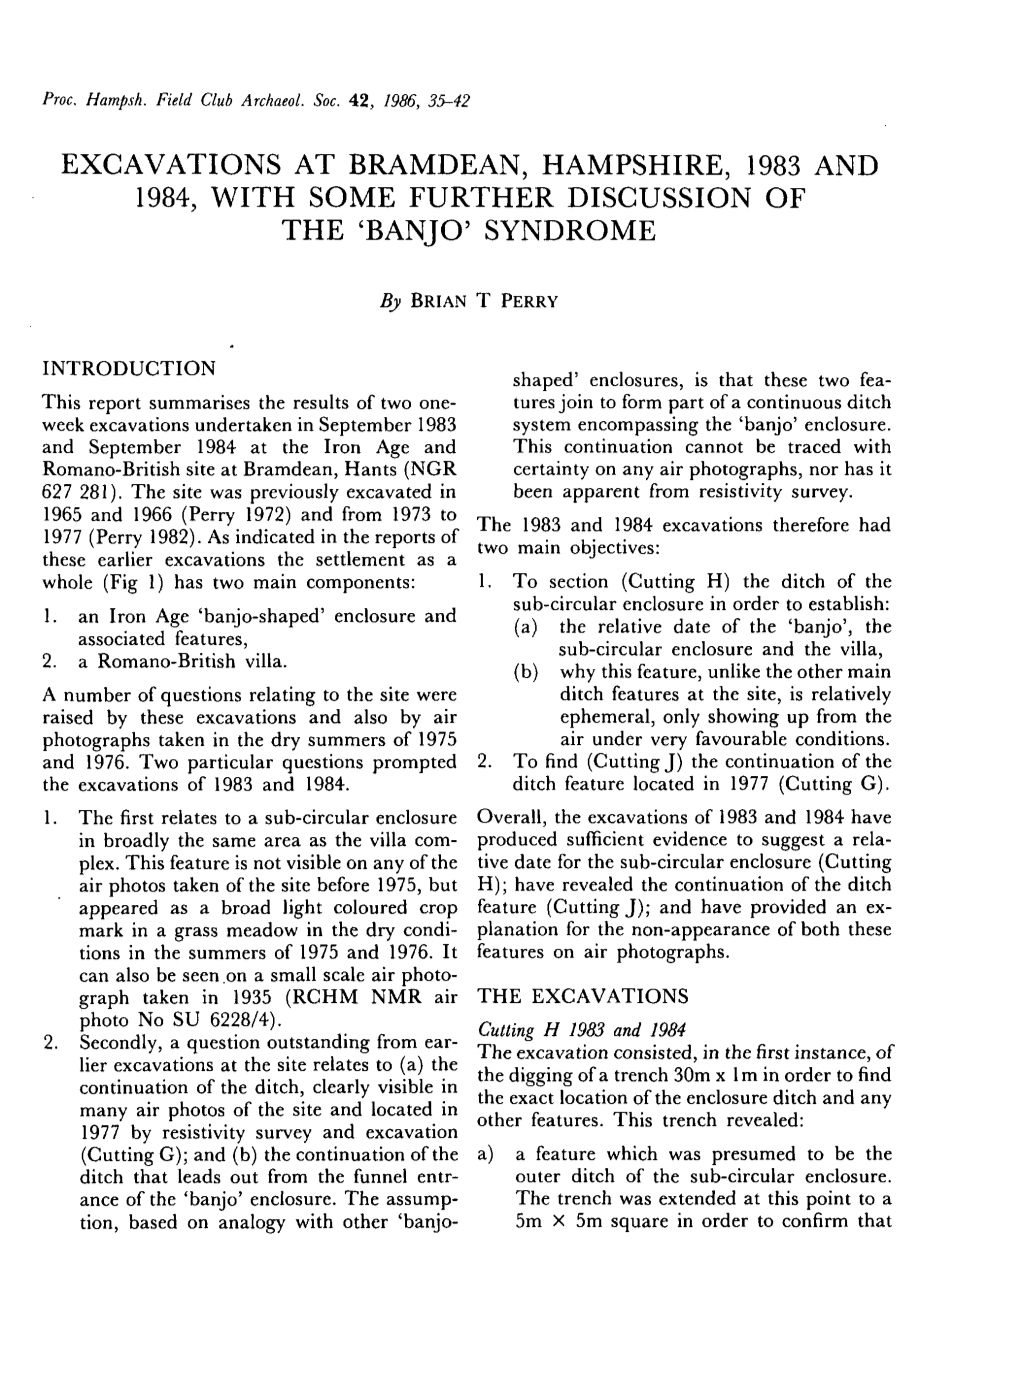 Excavations at Bramdean, Hampshire, 1983 and 1984, with Some Further Discussion of the 'Banjo' Syndrome